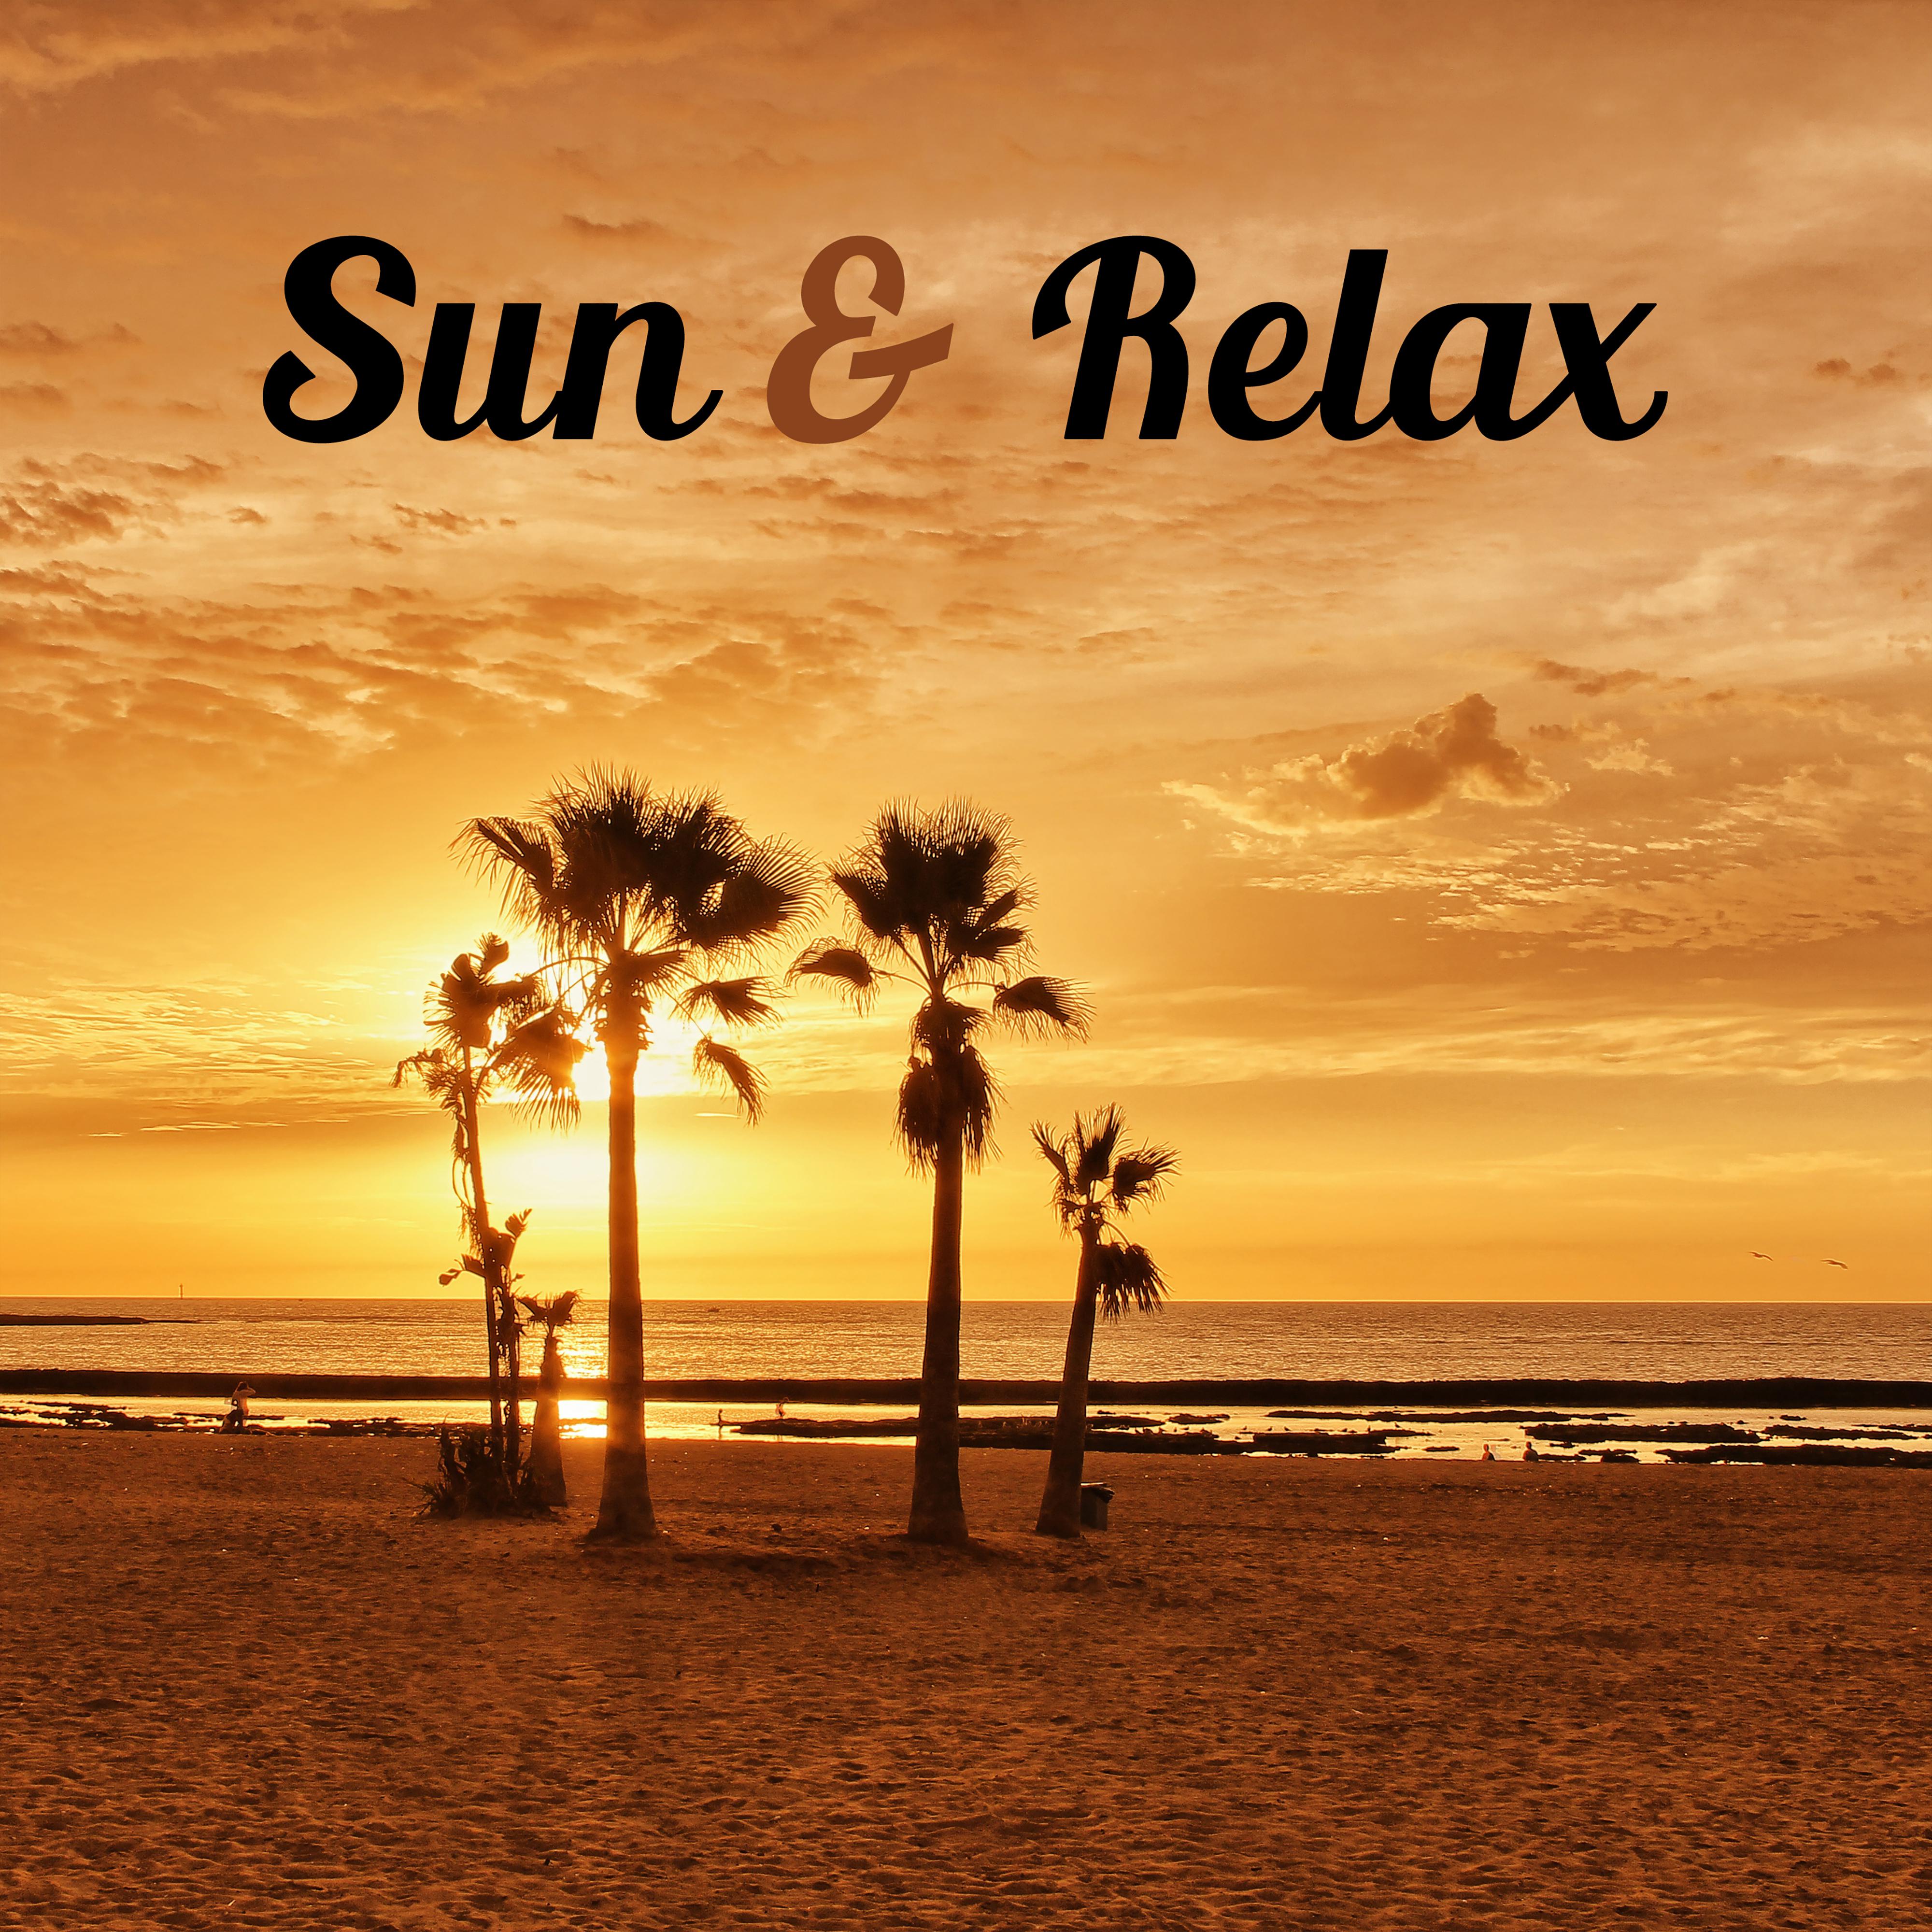 Sun & Relax – Chillout Music, Ibiza Lounge, Deep Meditation, Summertime, Relax on the Beach, Relaxation Songs